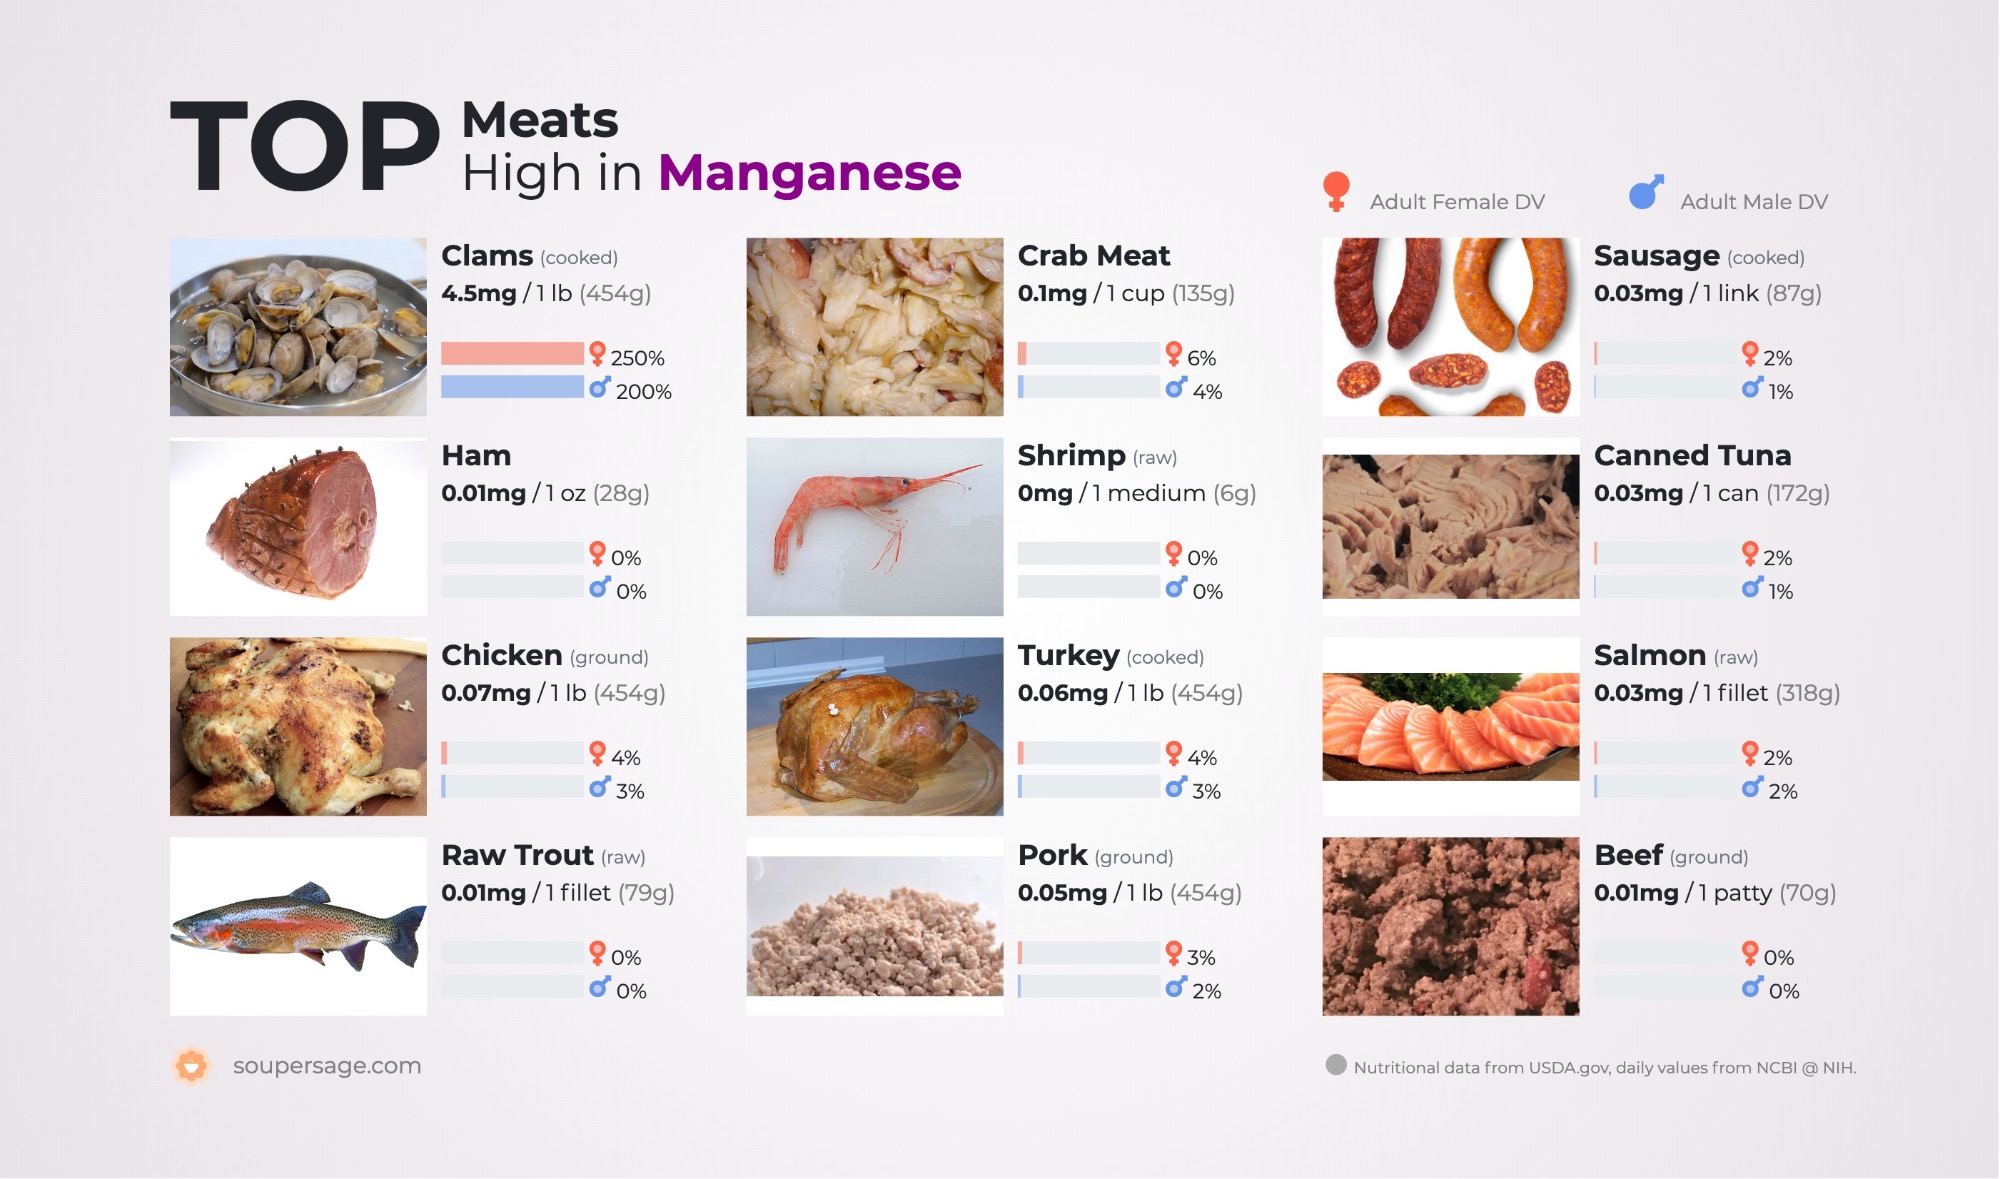 image of Top Meats High in Manganese